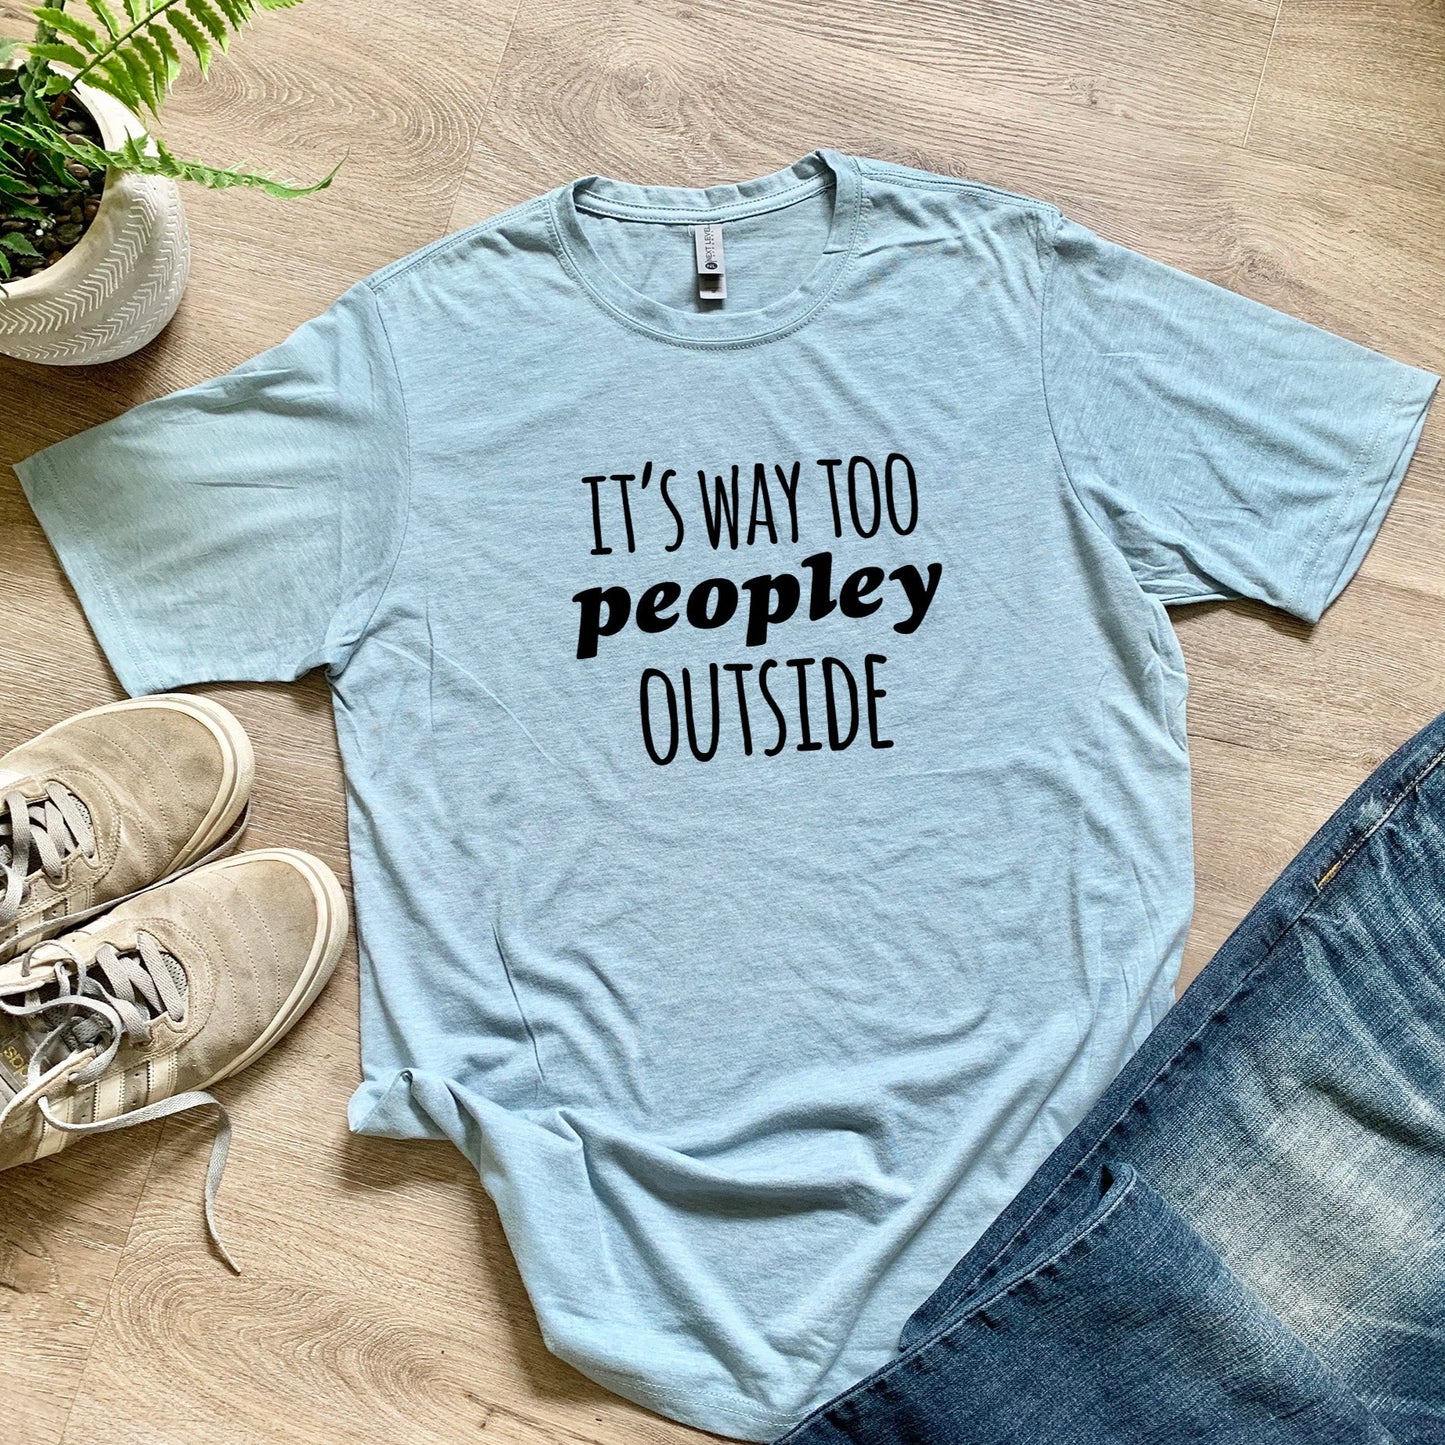 It's Way Too Peopley Outside - Men's / Unisex Tee - Stonewash Blue or Sage